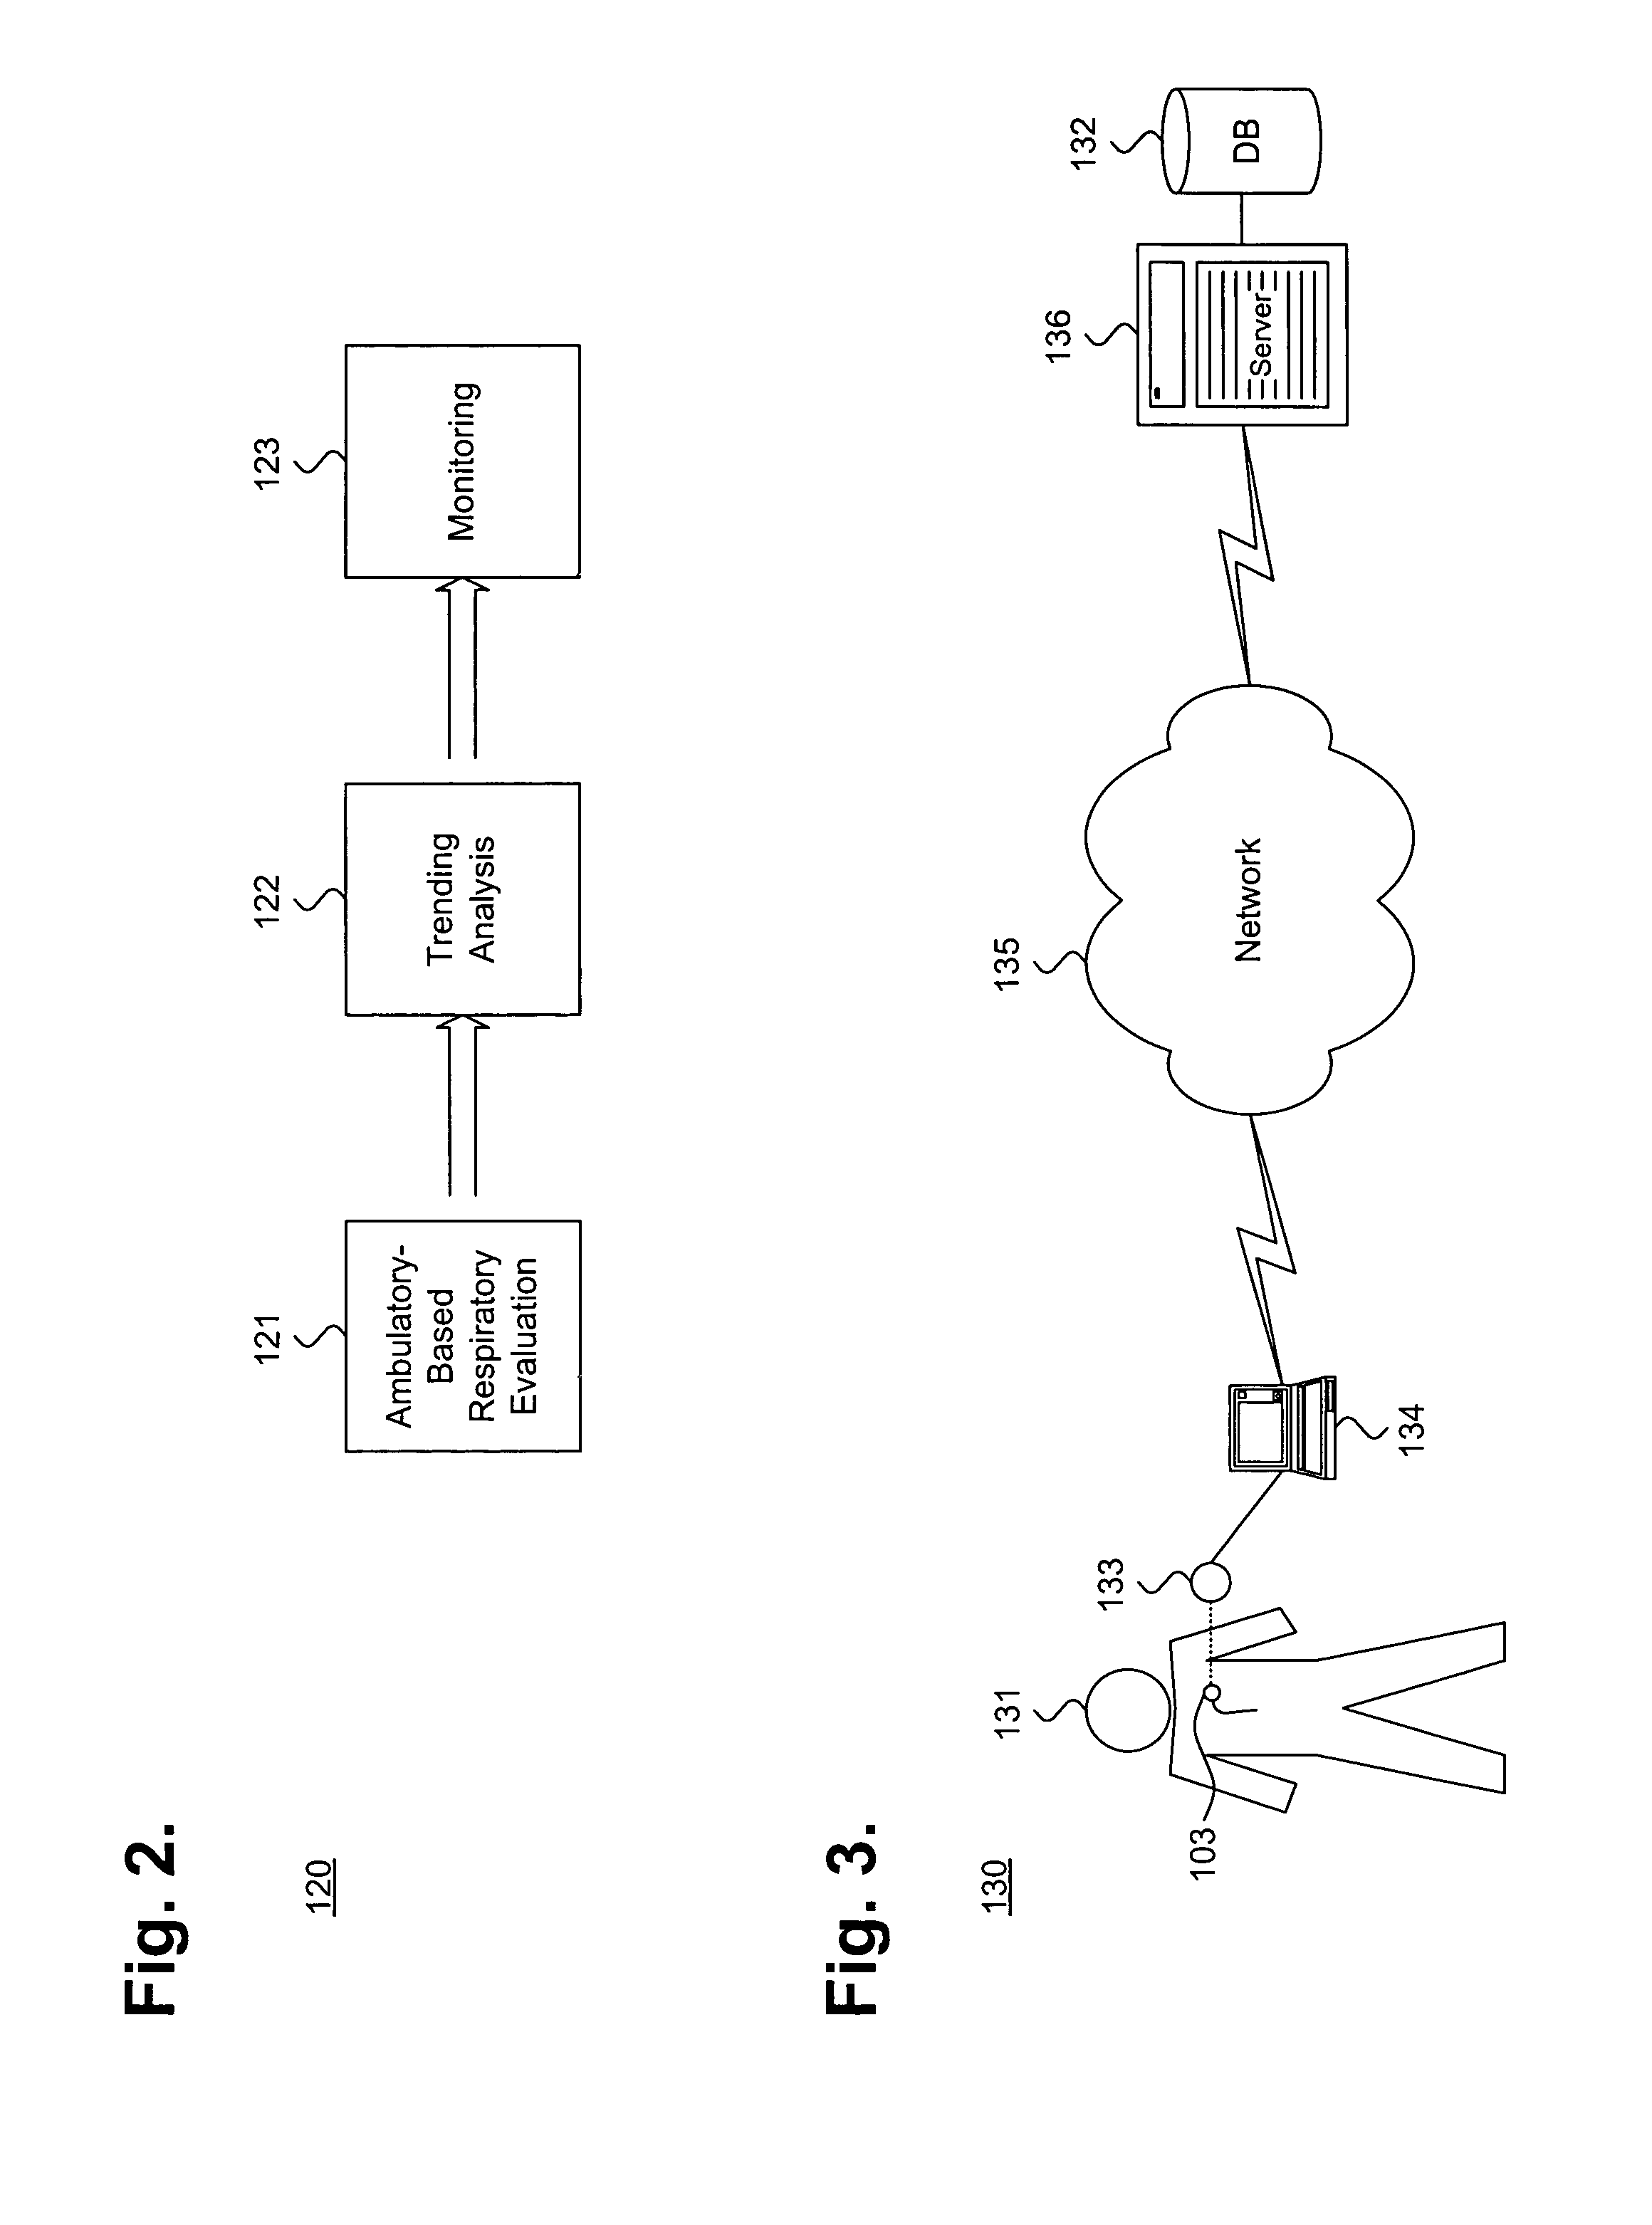 System and method for assessing pulmonary performance through transthoracic impedance monitoring